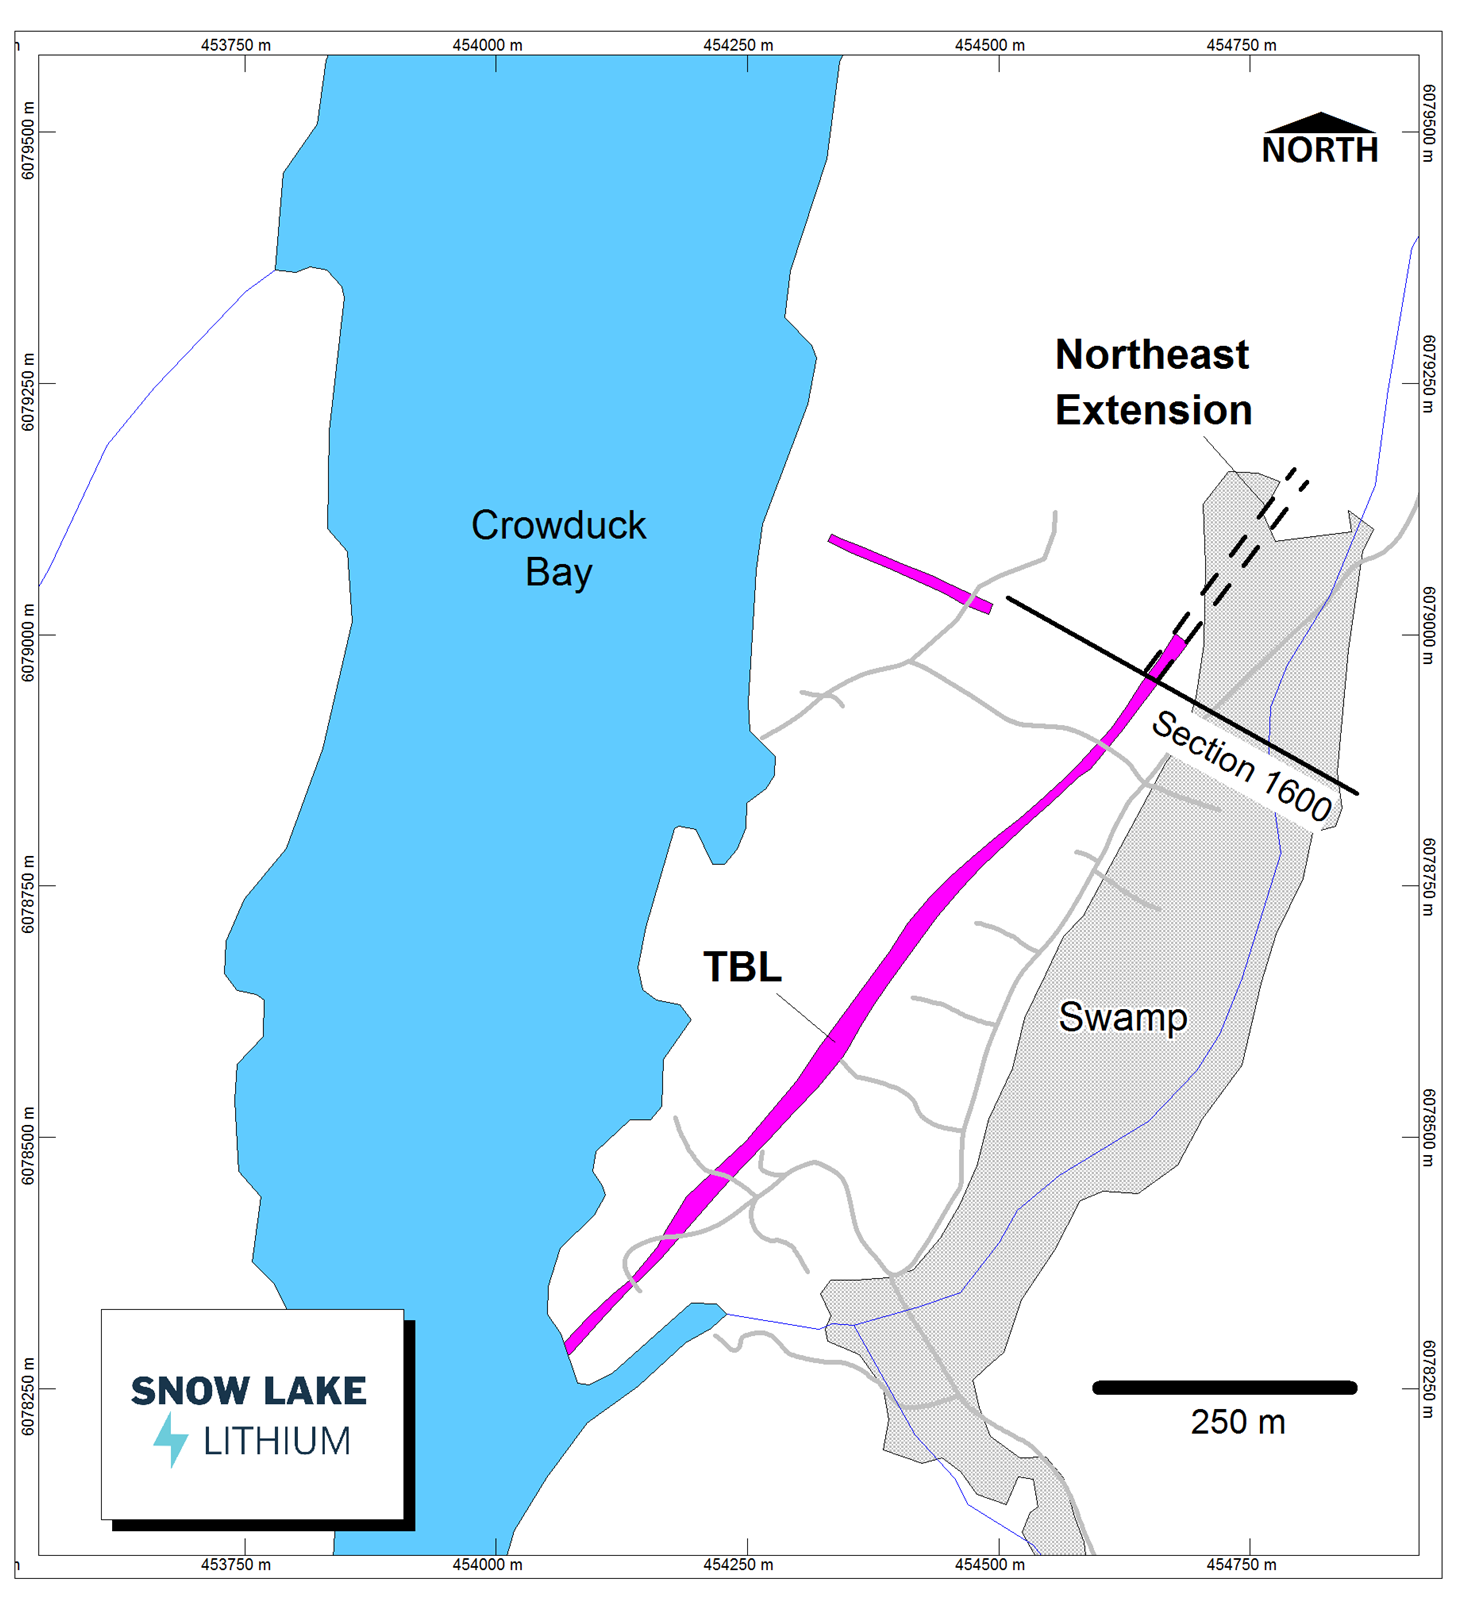 Snow Lake Resources Ltd., Monday, May 2, 2022, press release image